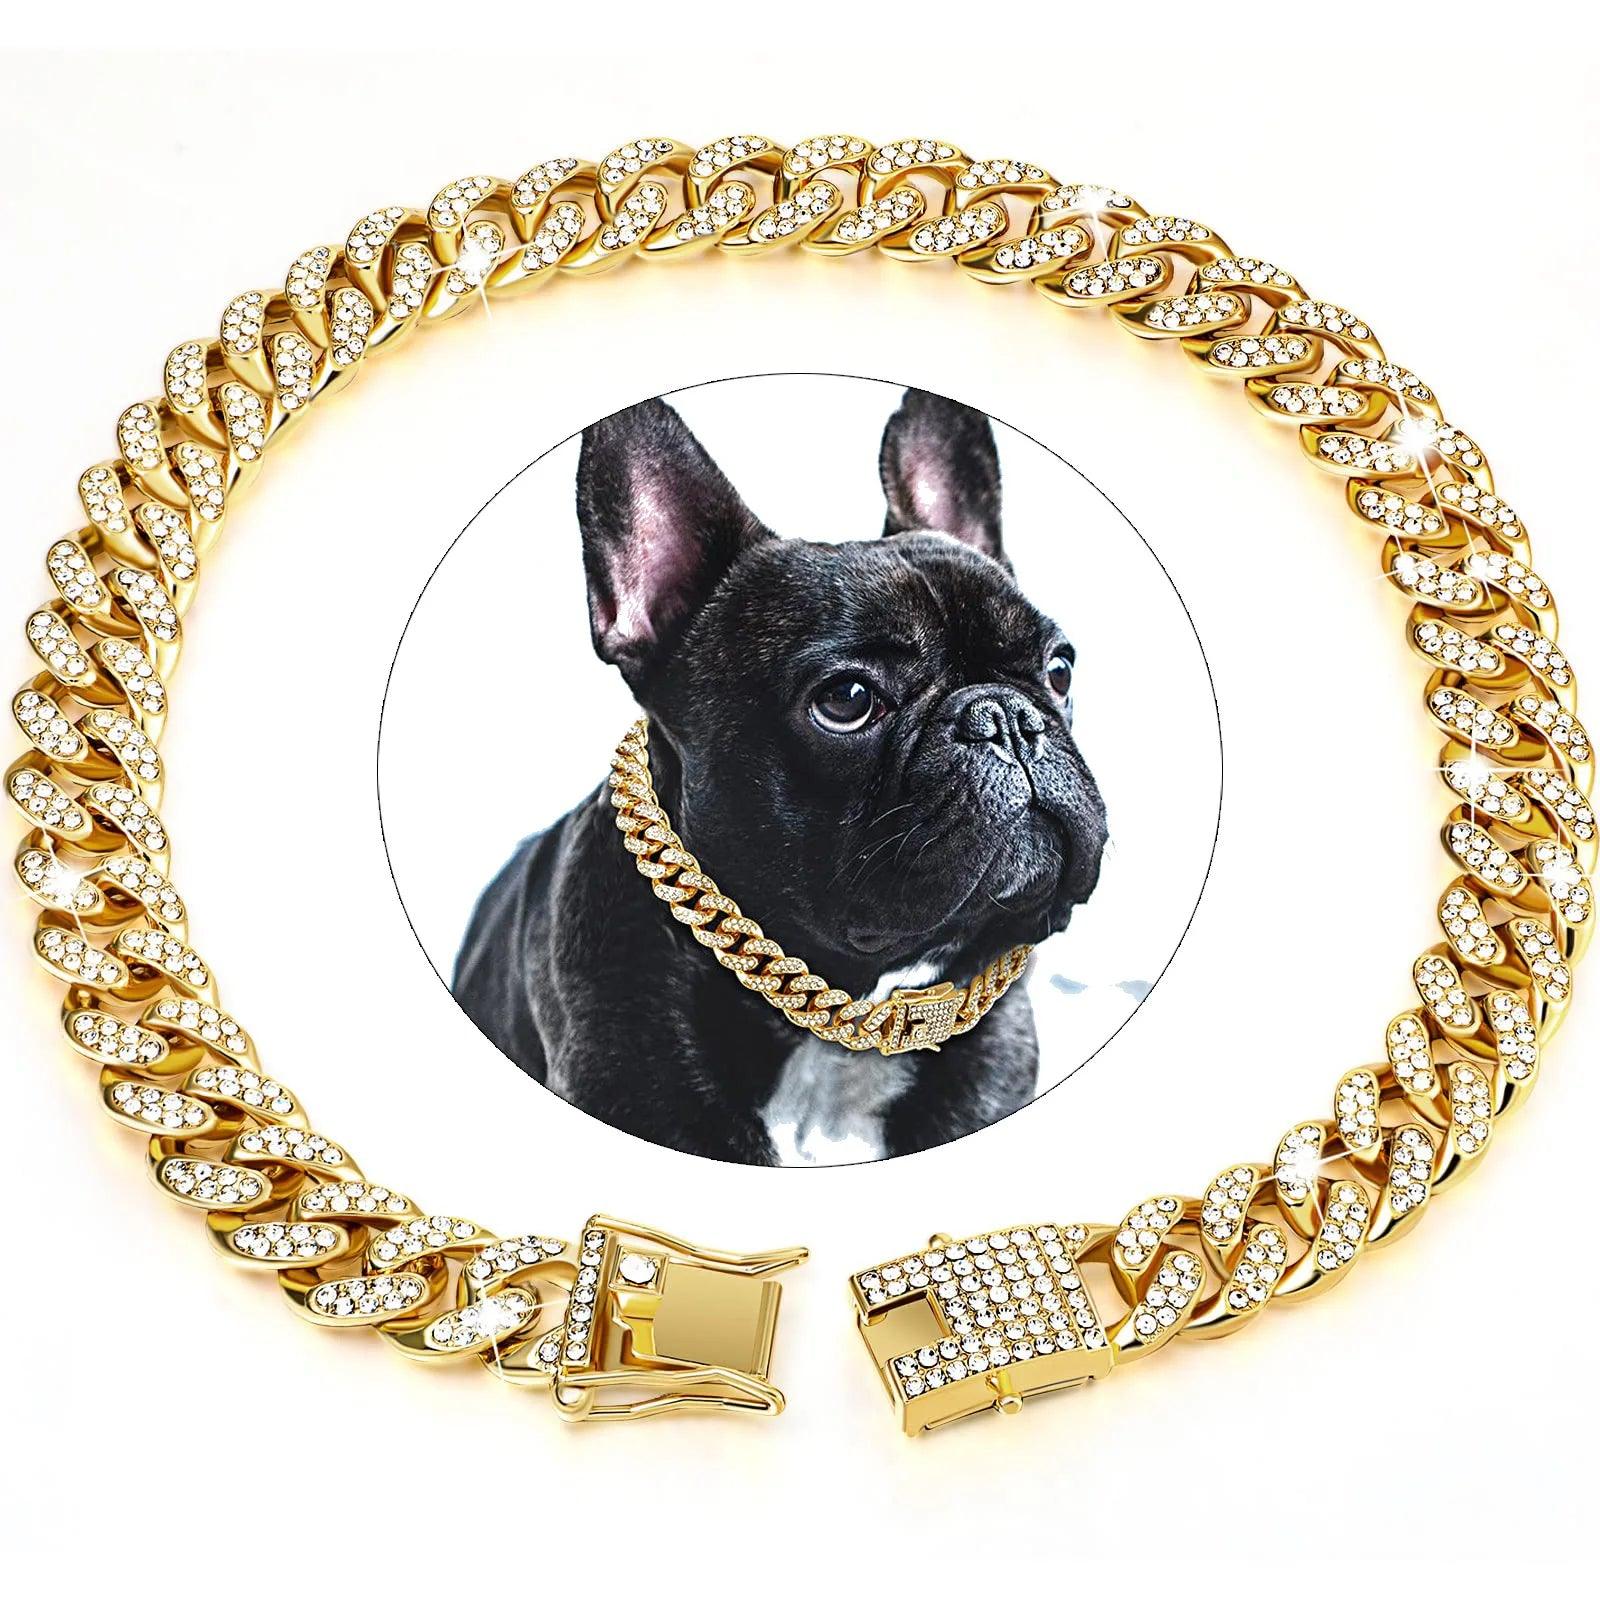 Dog Cat Chain Diamond Cuban Collar Walking Metal Chain Collar with Design Secure Buckle, Pet Cat Cuban Collar Jewelry Accessories - Ammpoure Wellbeing